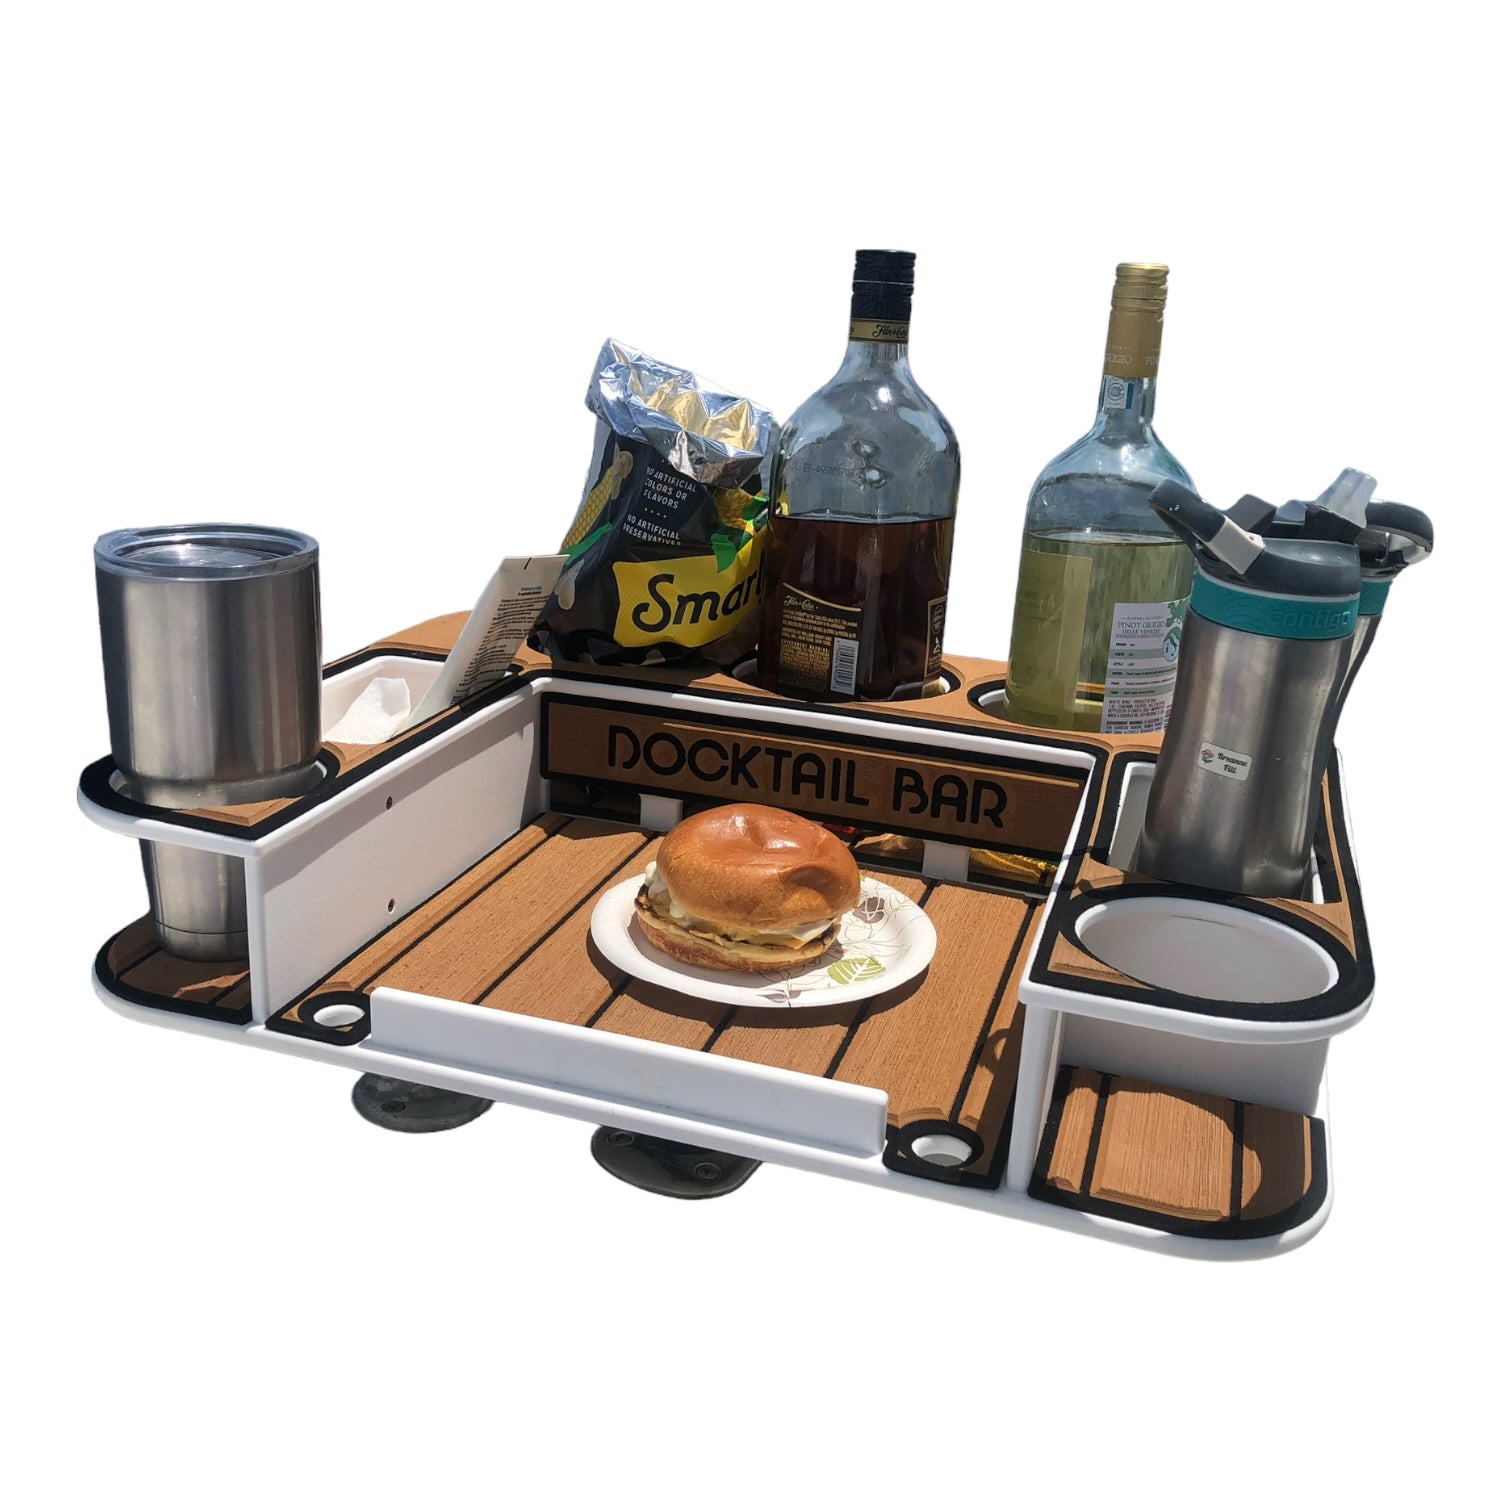 Docktail Butler Marine Food and Cocktail Table - Includes Adjustable Folding Rod Holder Mount - Large Serving Tray for Grill and Boat Cup.